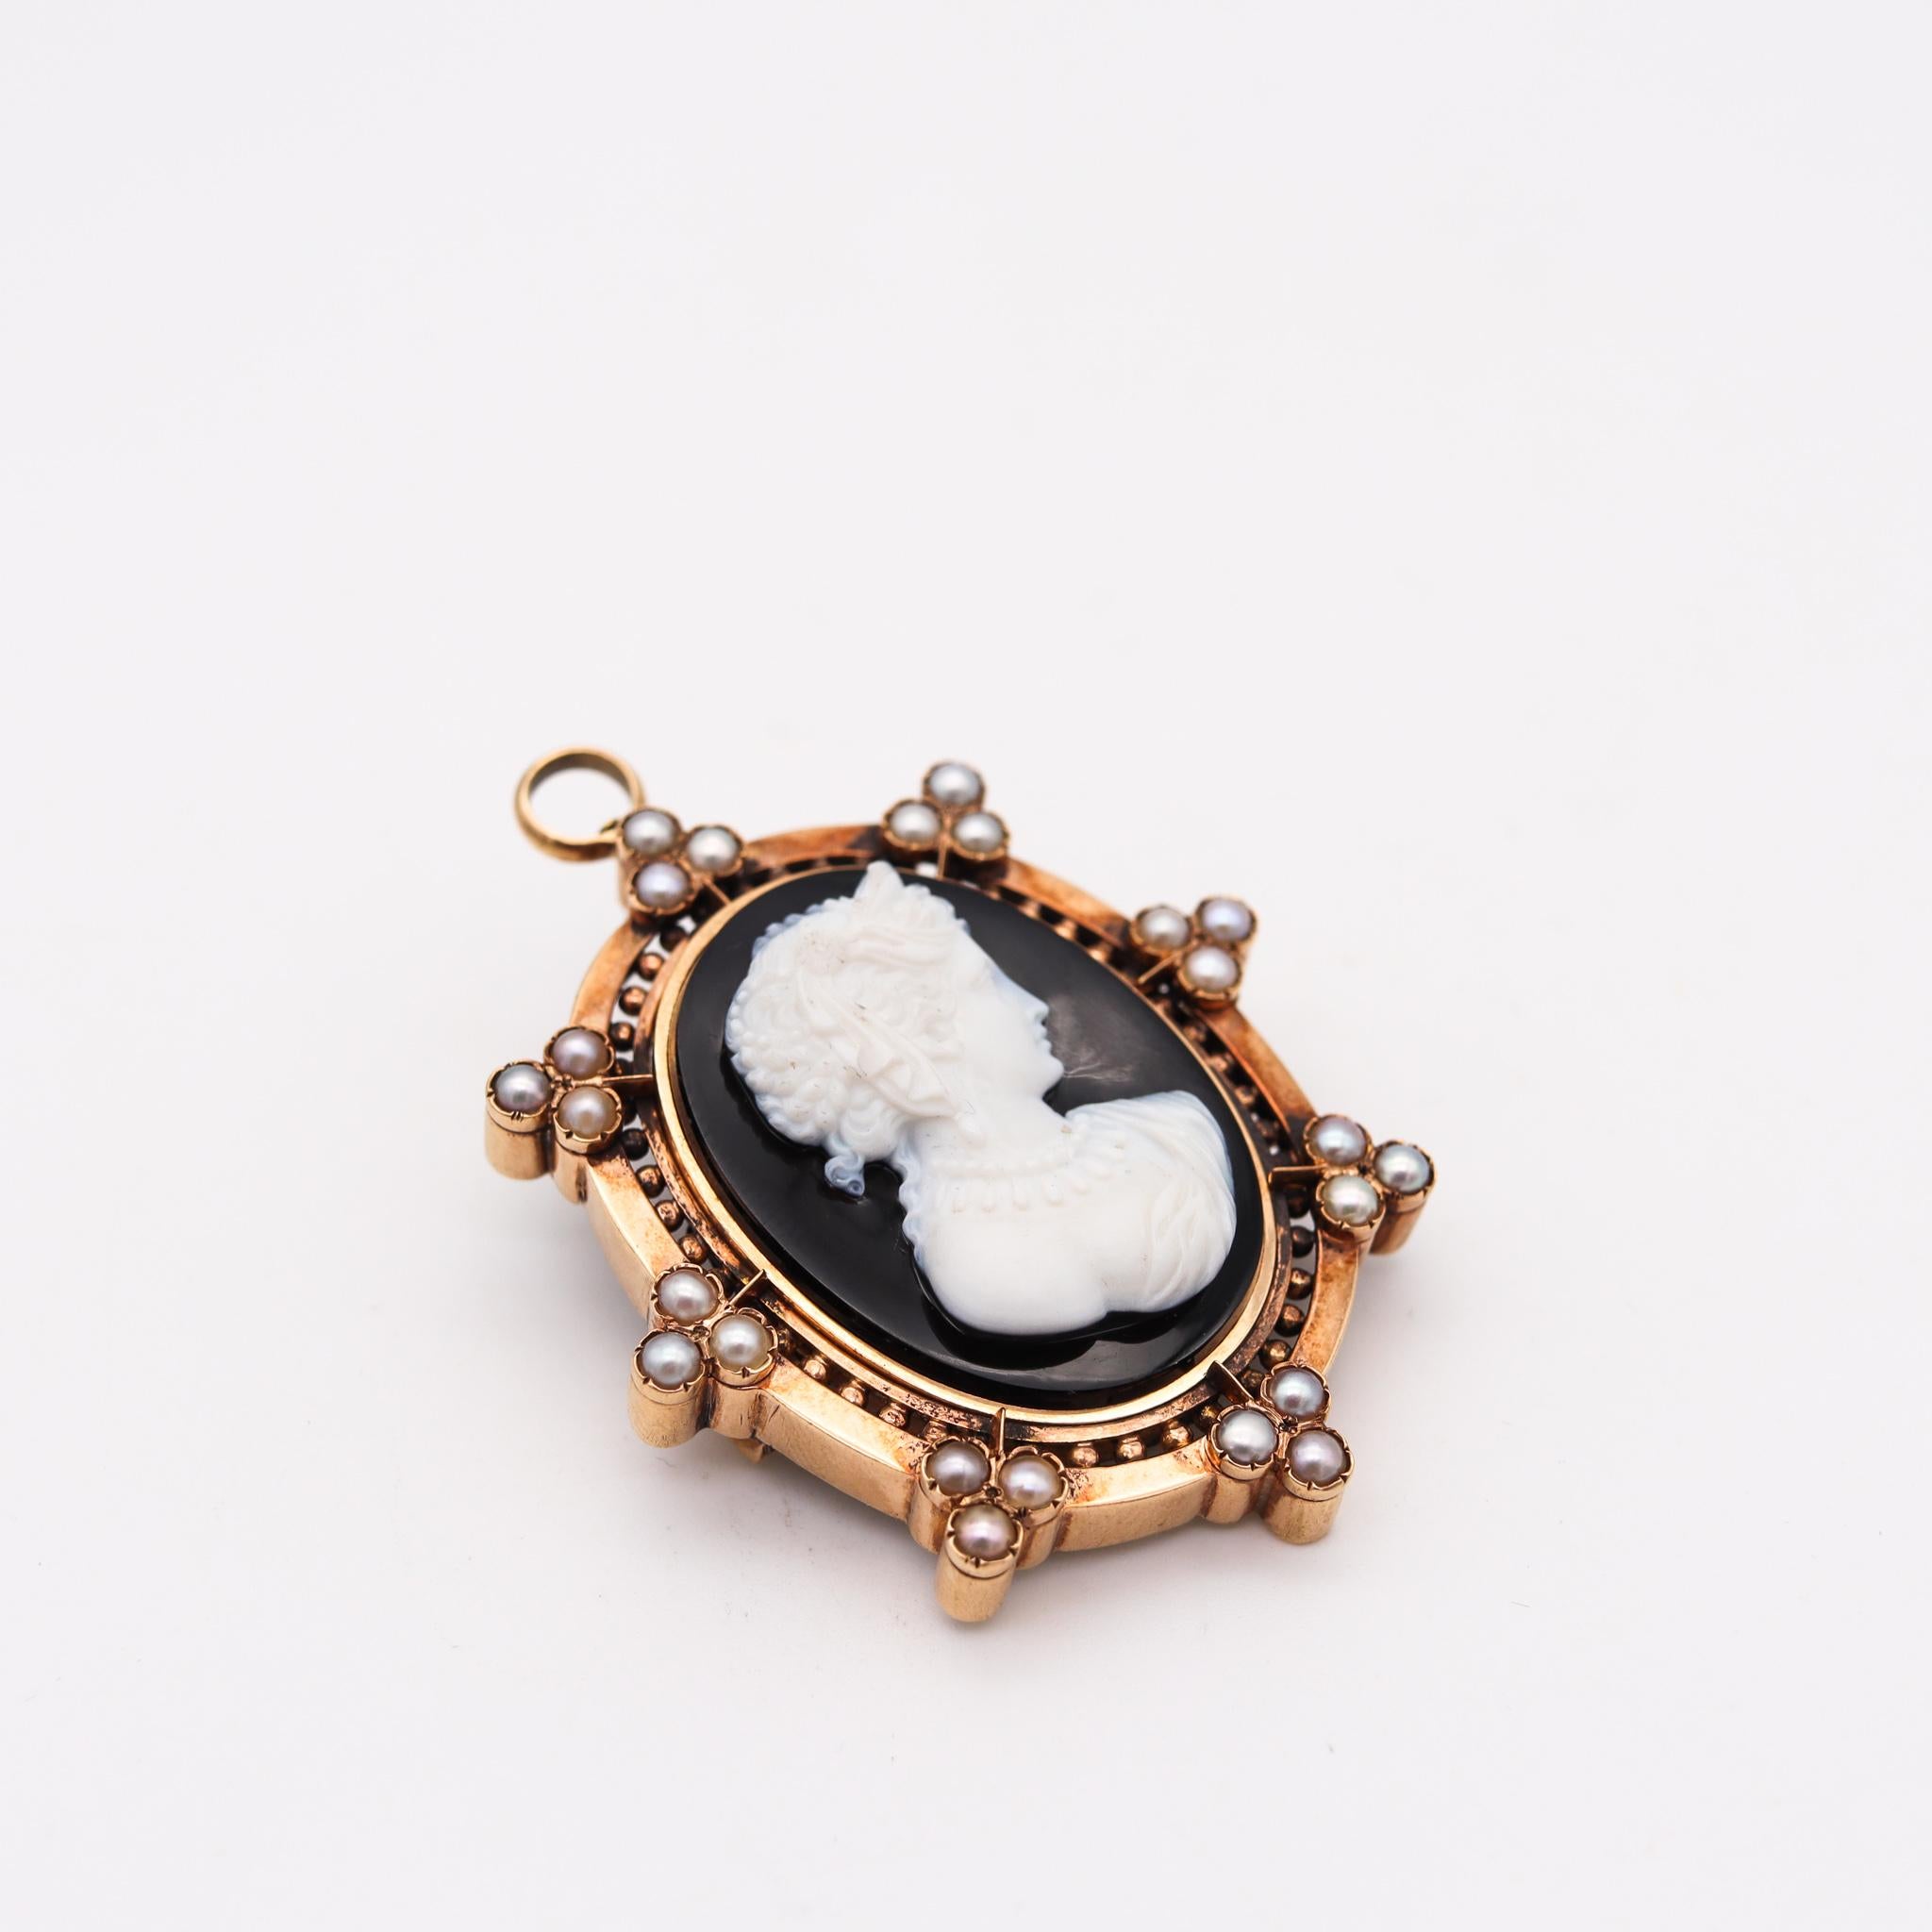 Victorian convertible pendant brooch.

A beautiful bold piece, created in England during the Victorian Era (1837-1901), circa 1870. This convertible pendant-brooch has been crafted in the Etruscan revival style in solid yellow gold of 15 karats.